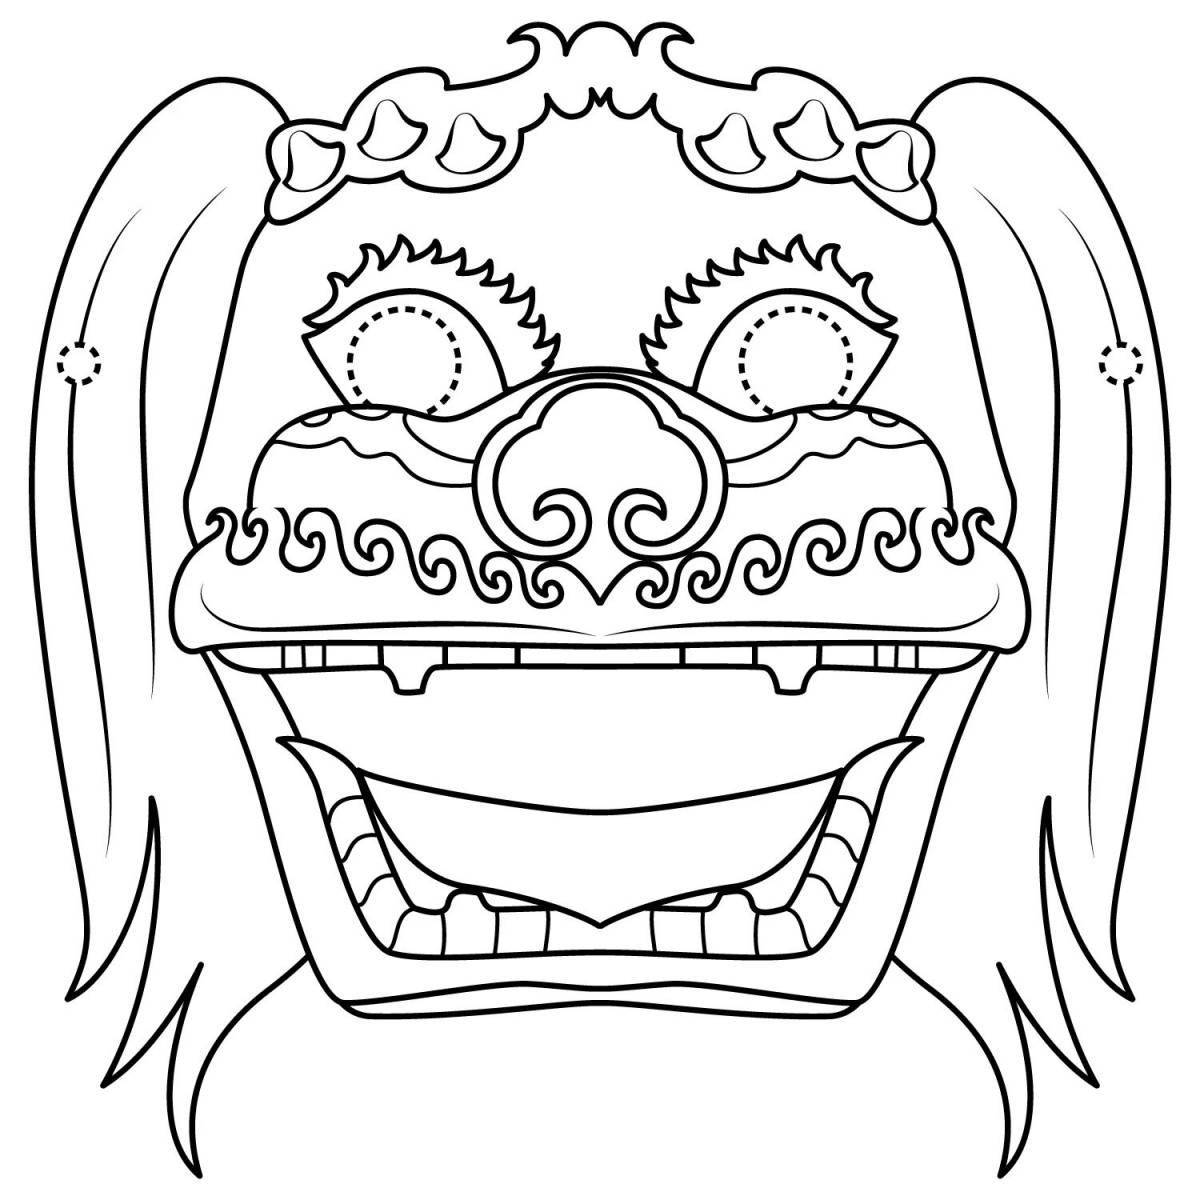 Grotesque scary face coloring page